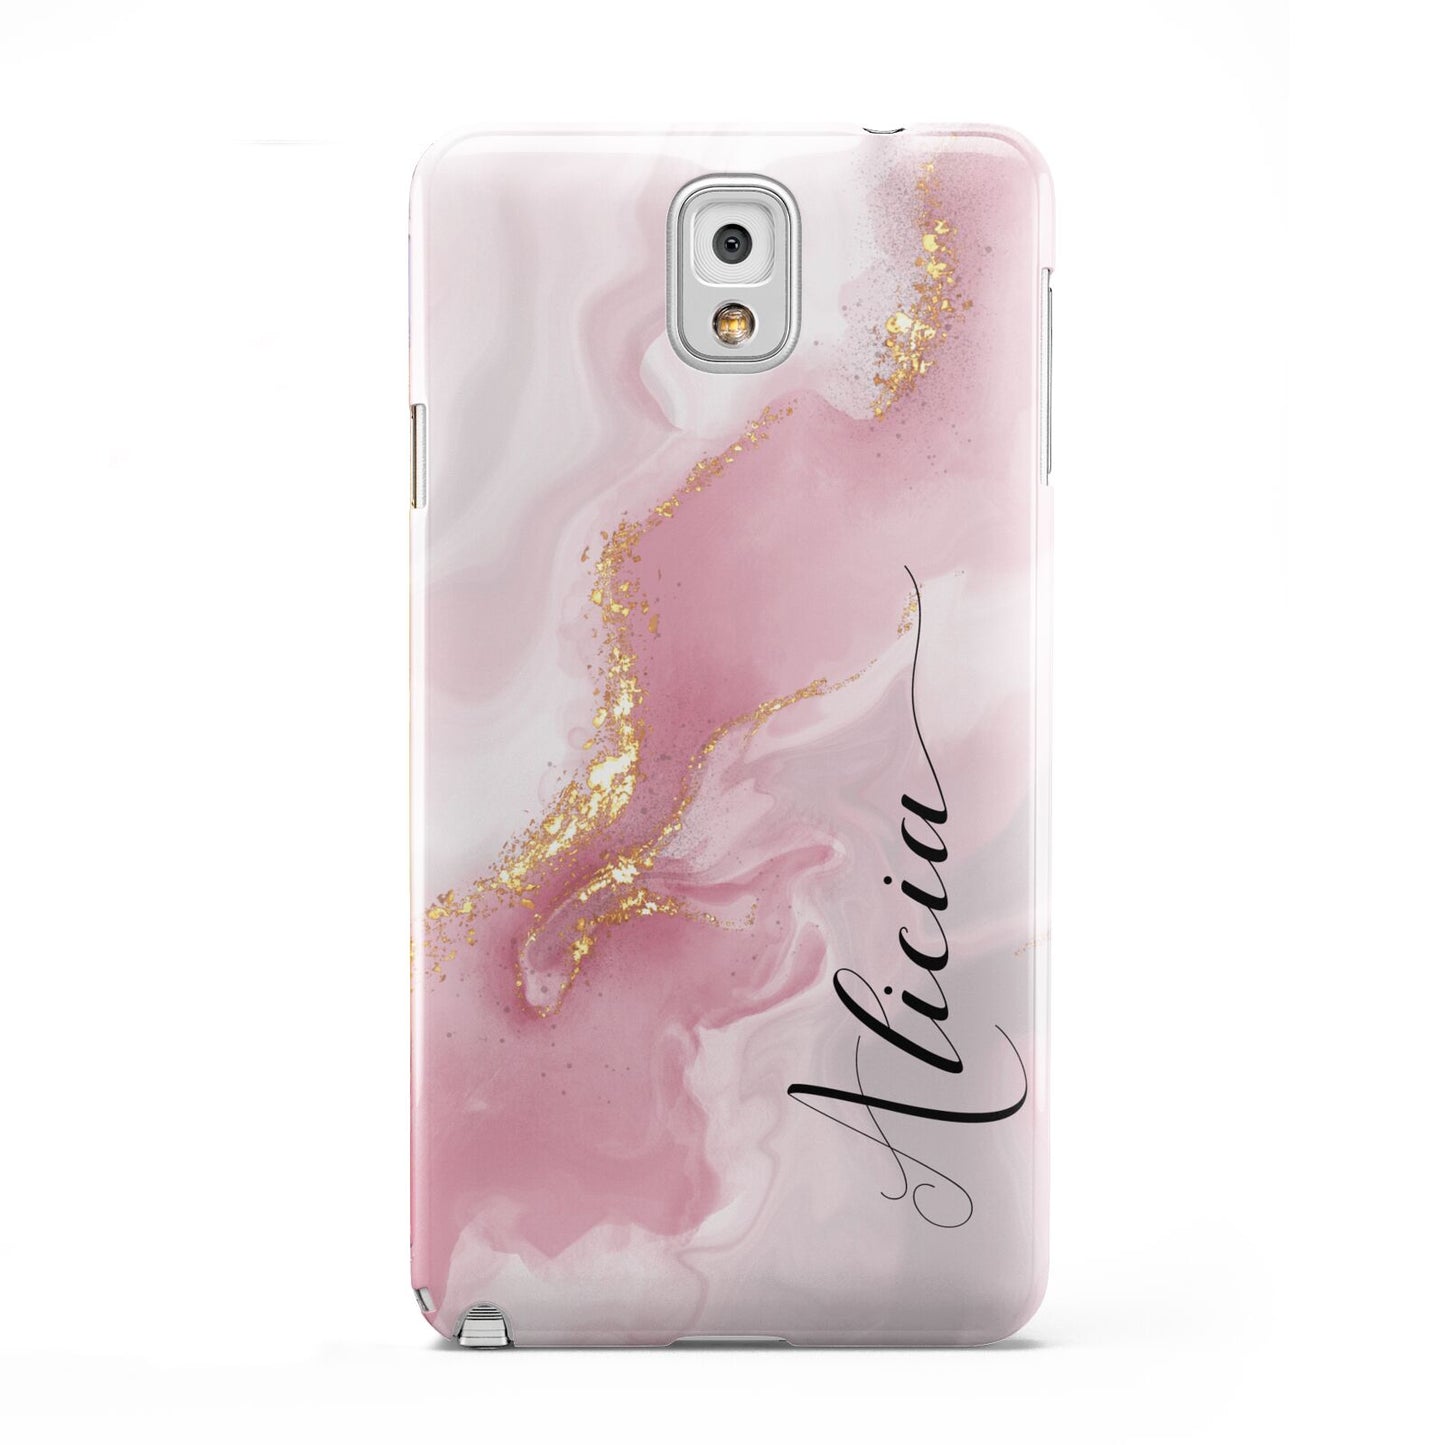 Personalised Pink Marble Samsung Galaxy Note 3 Case